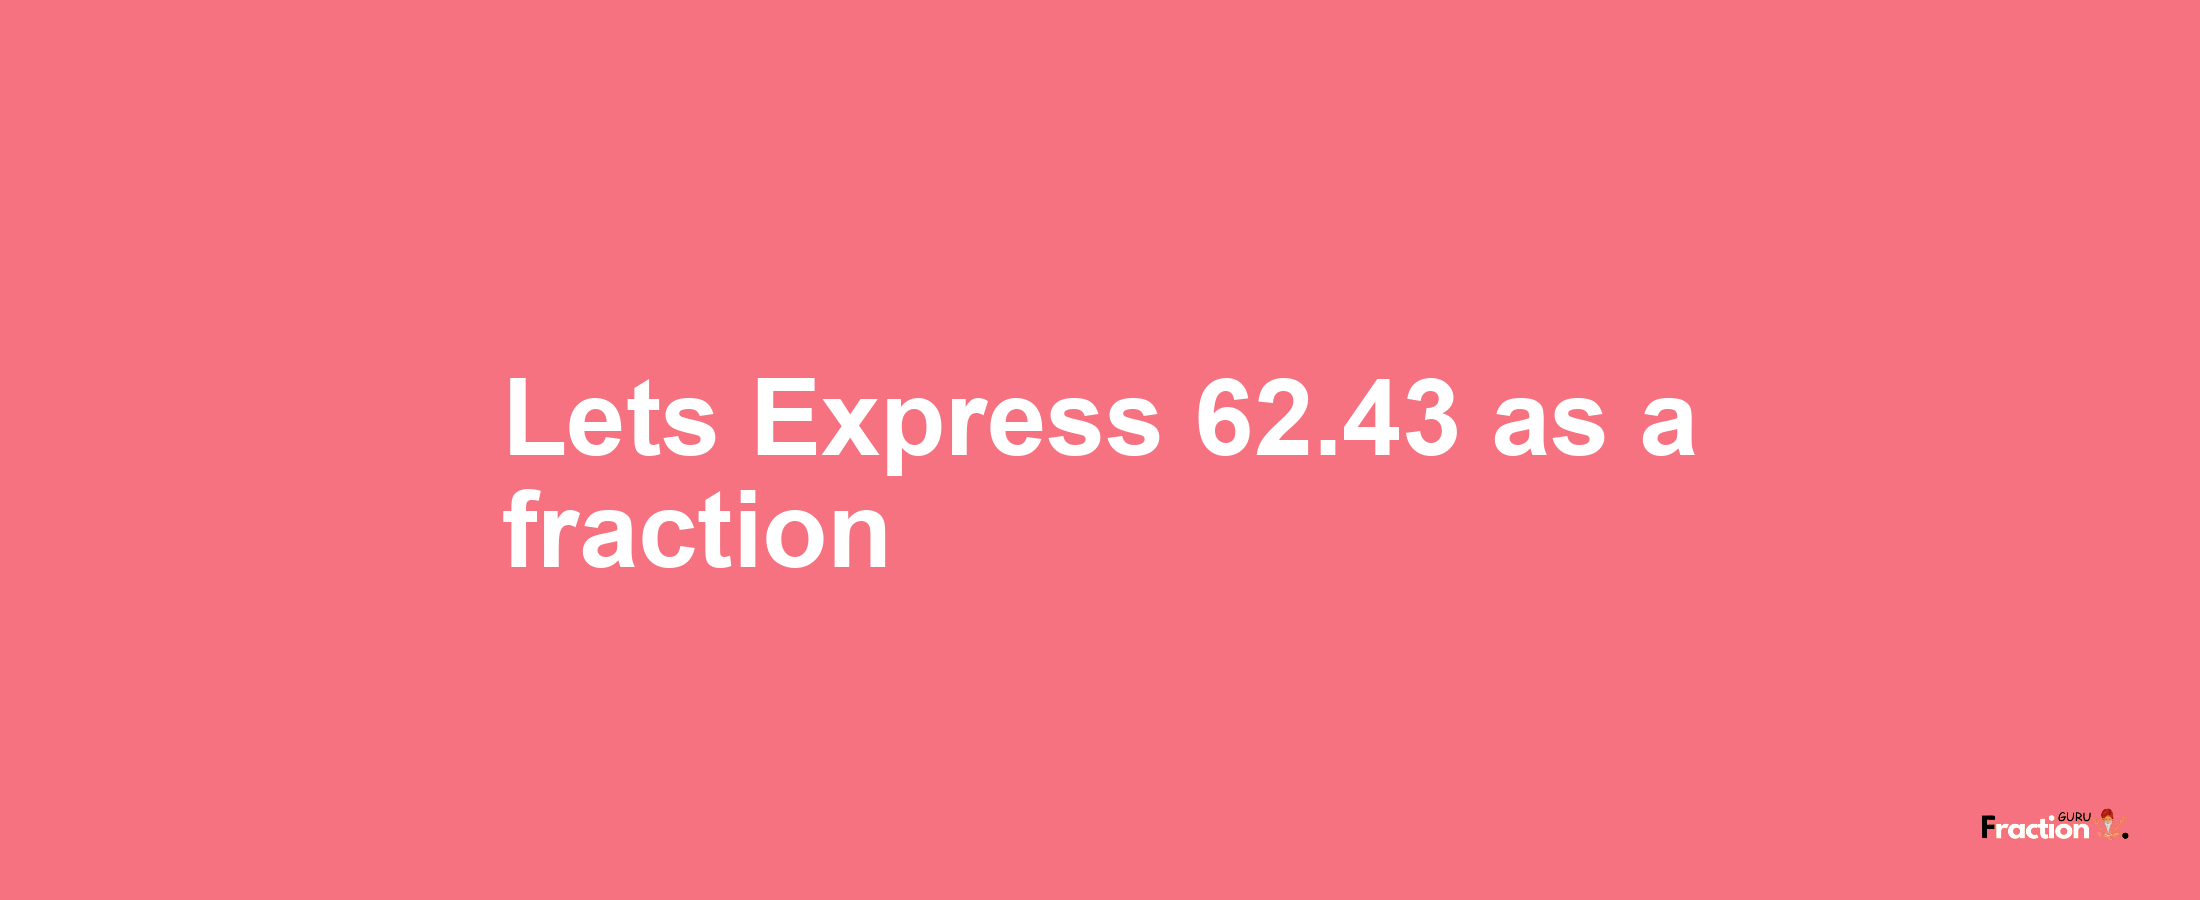 Lets Express 62.43 as afraction